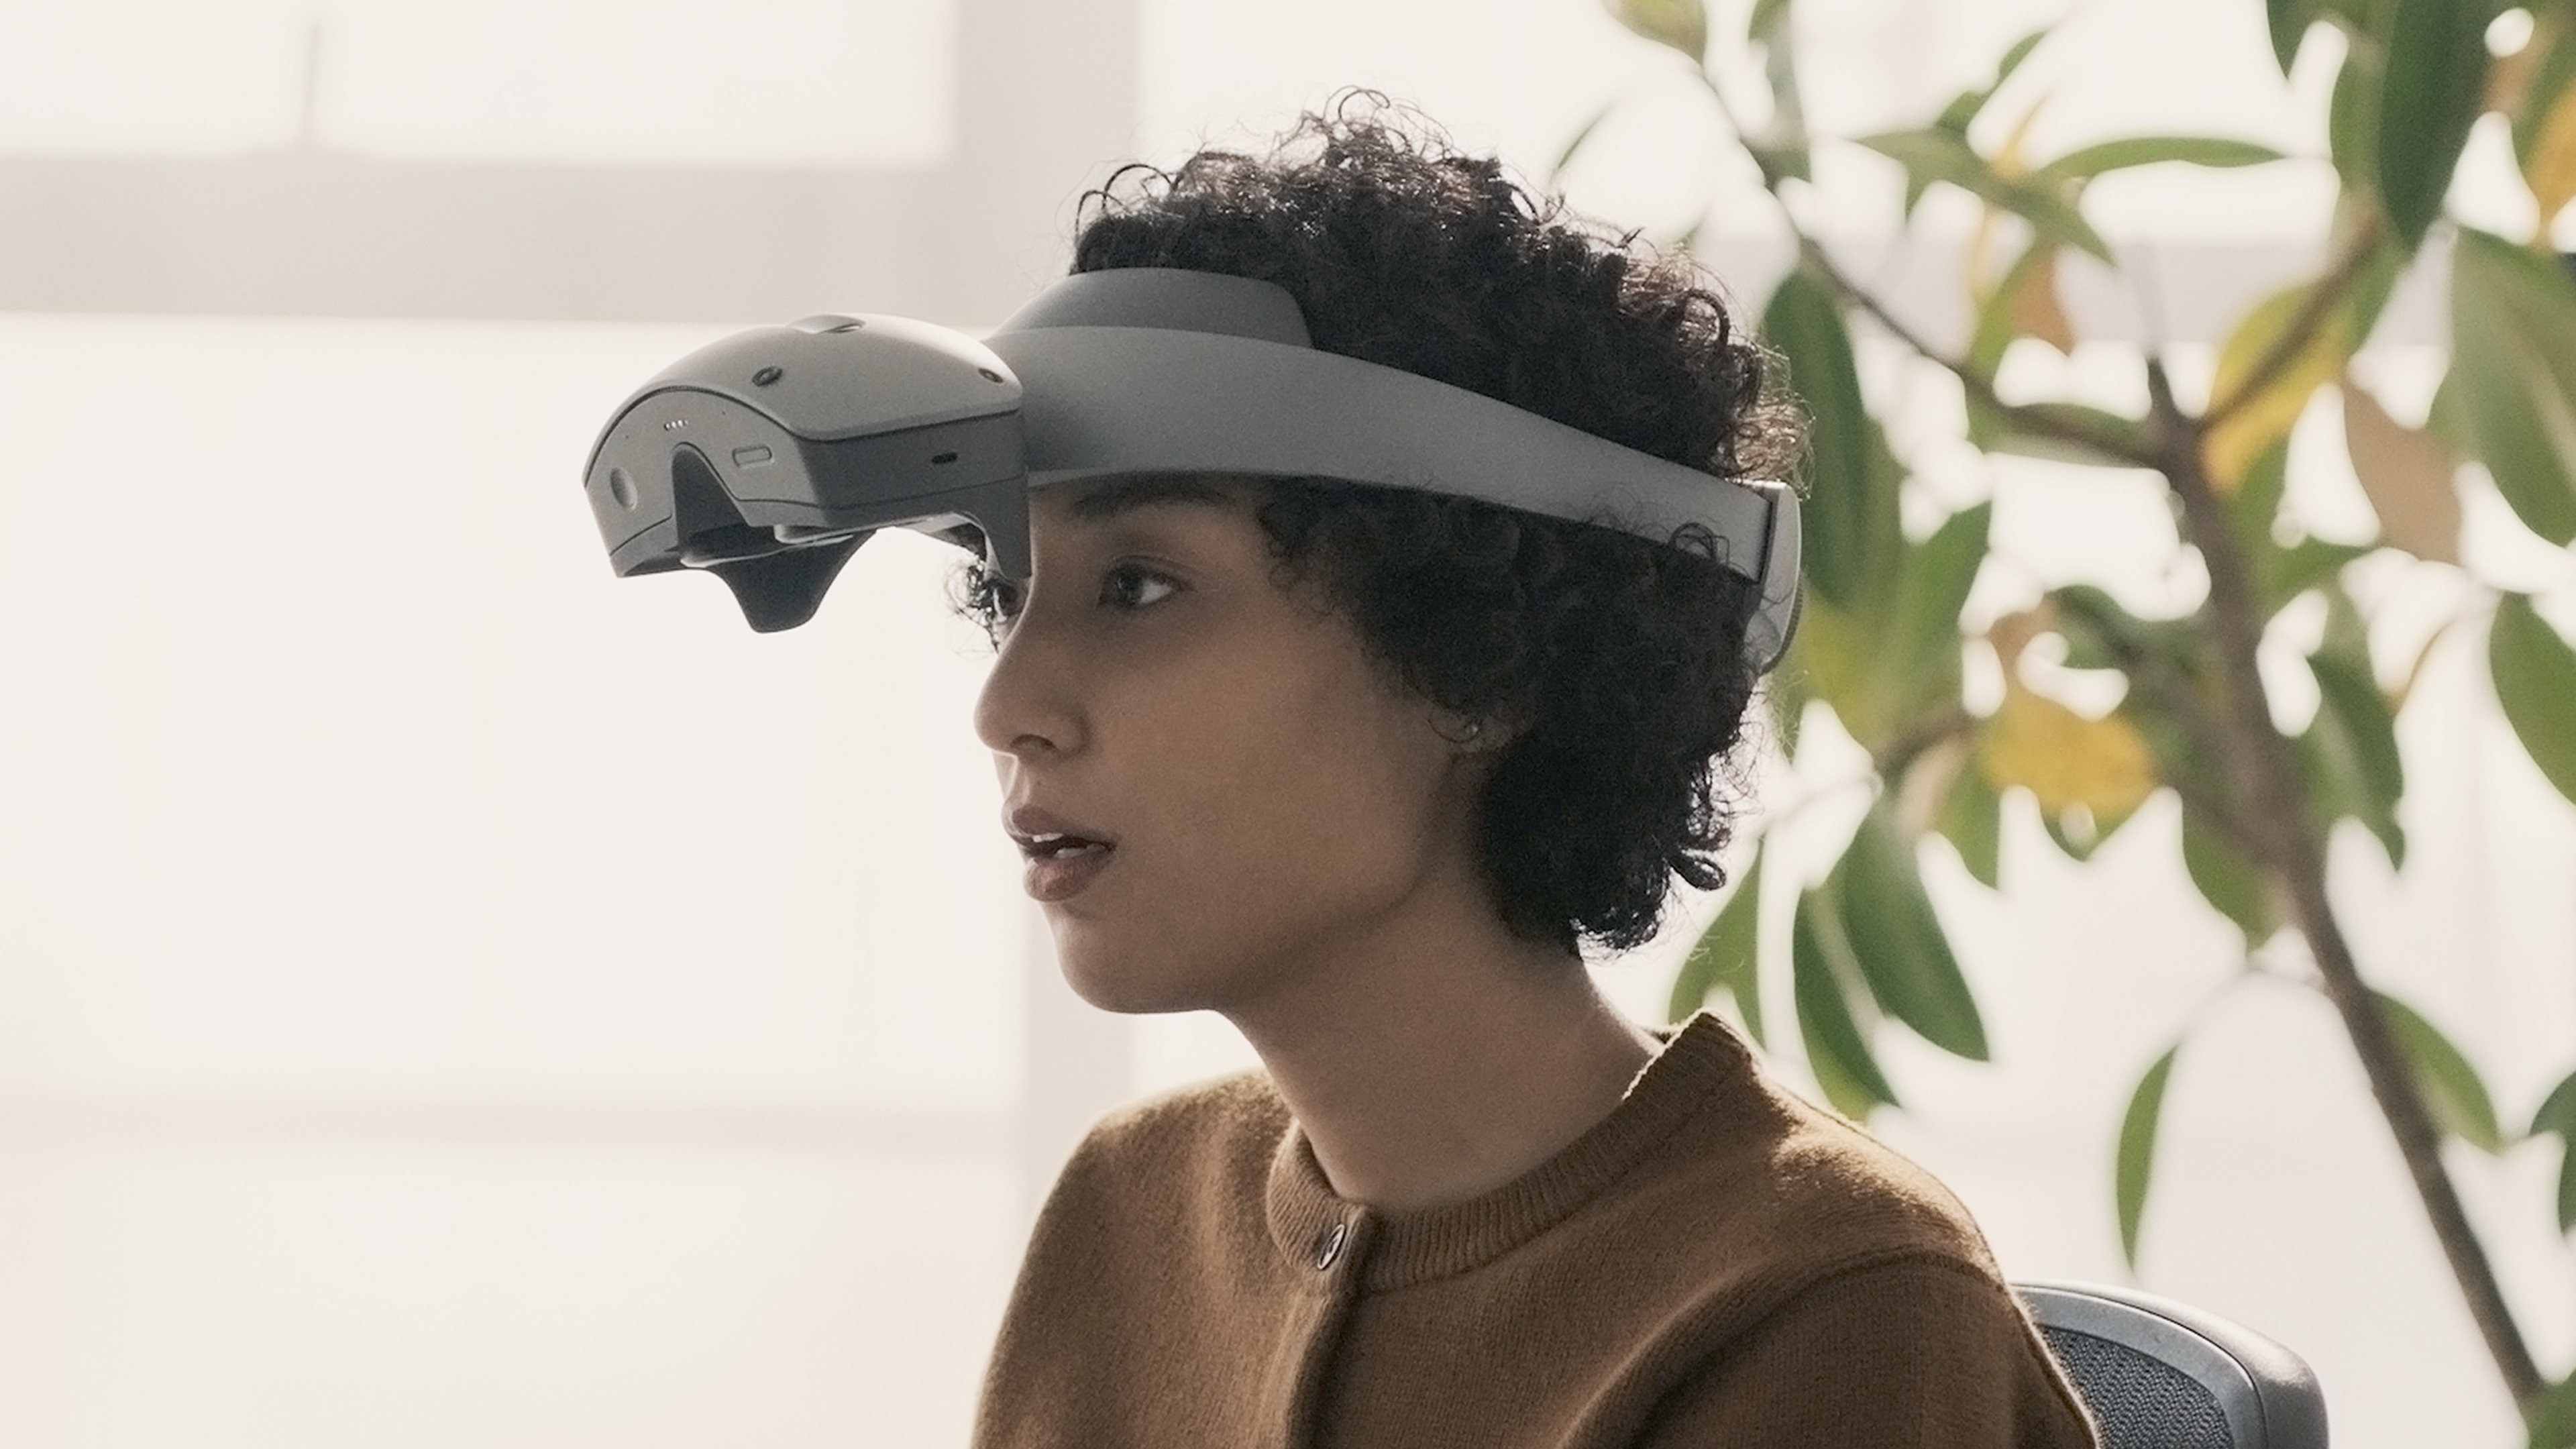 The unnamed Sony XR headset with its display flipped up so the user's eyes are unblocked.